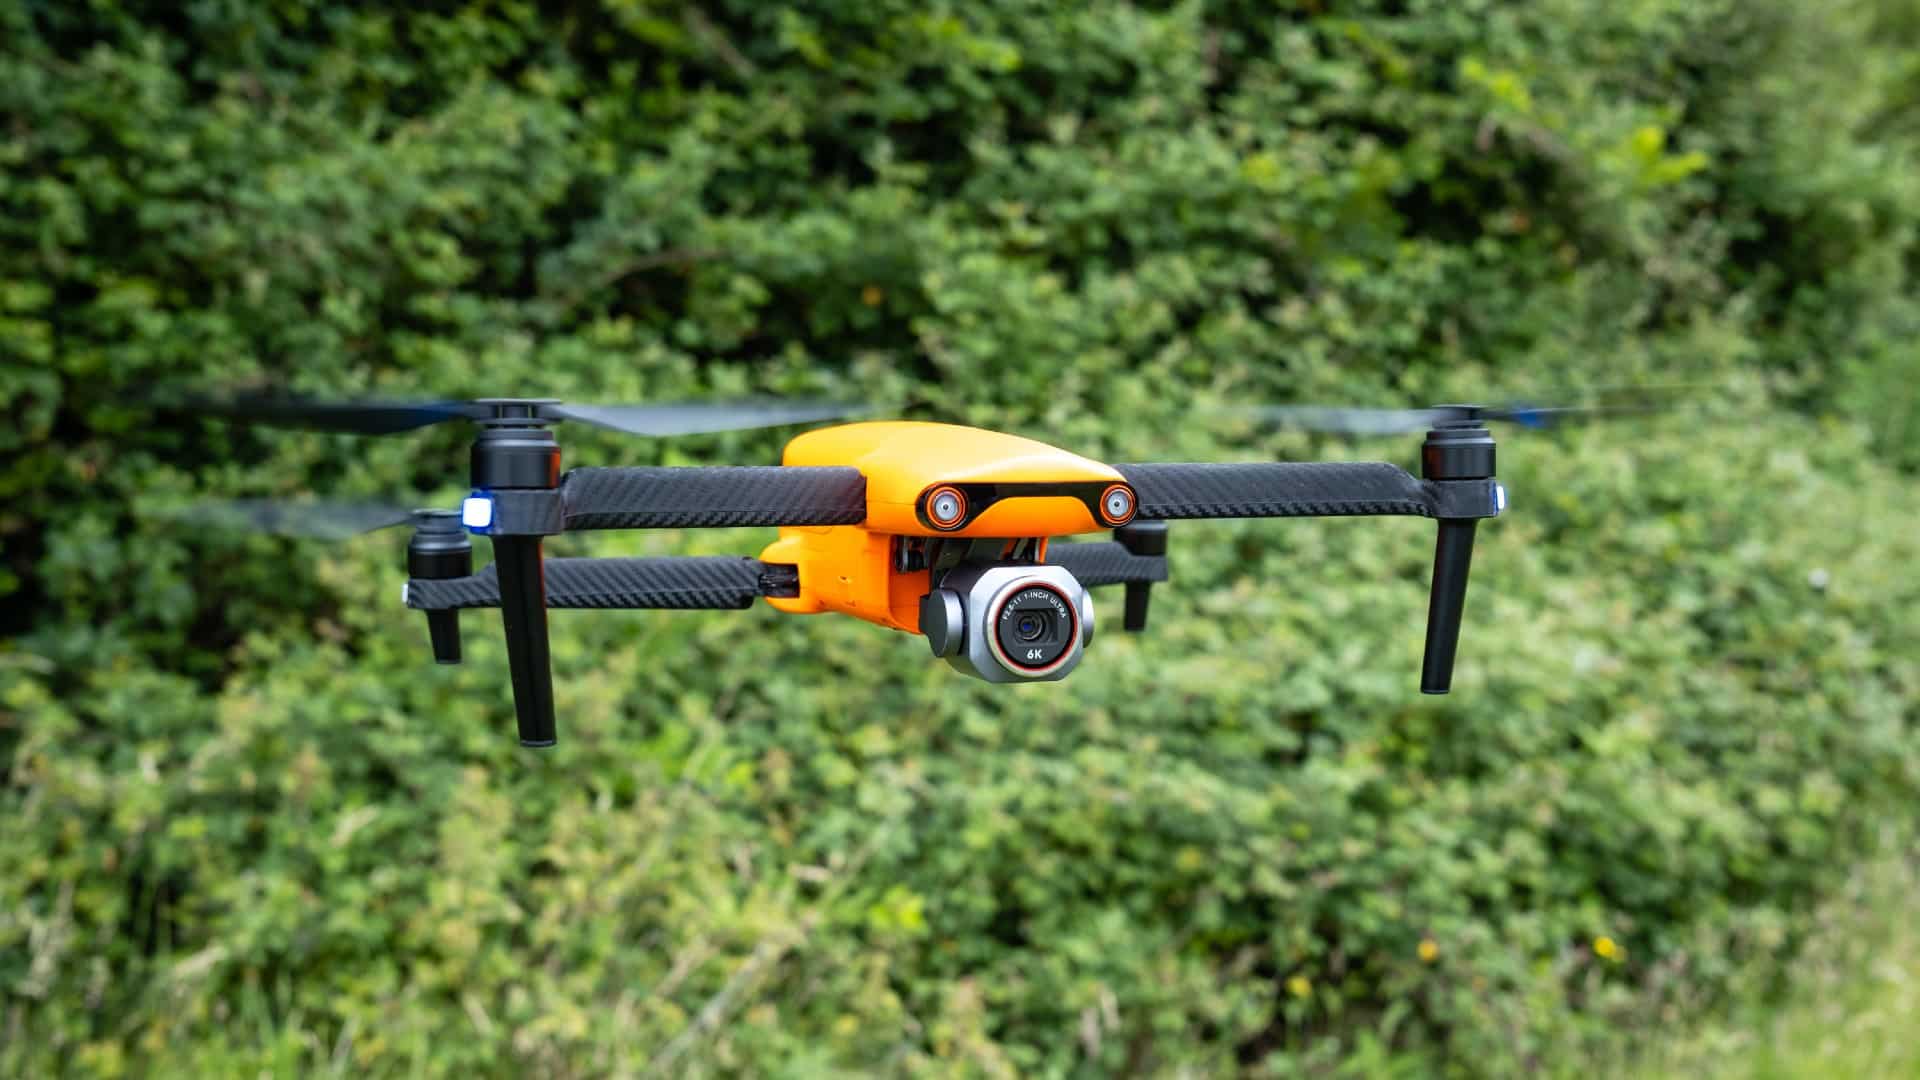 Autel Evo Lite+ best drone for real estate photography